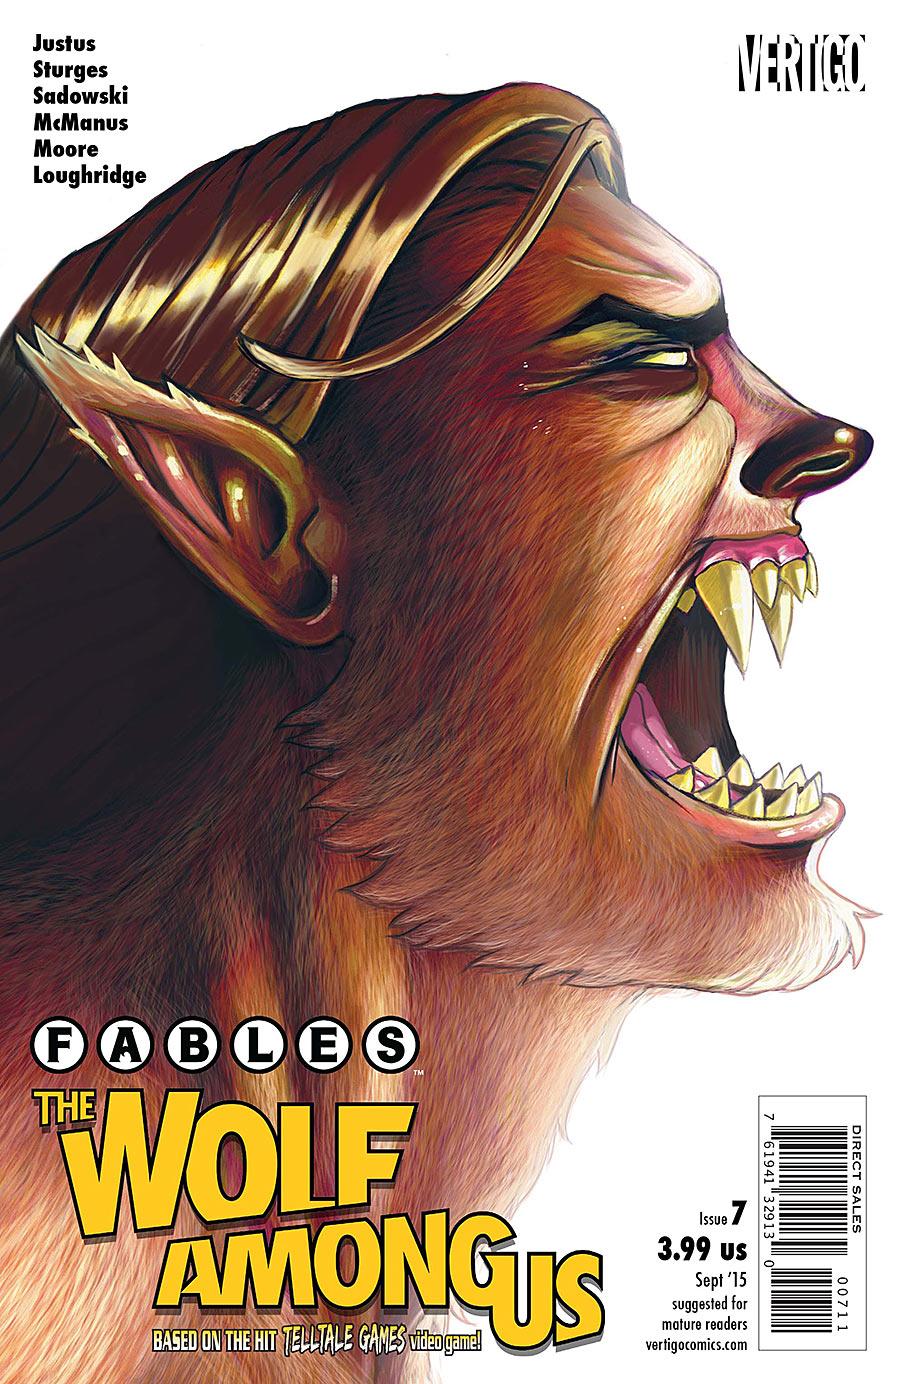 Fables: The Wolf Among Us Vol. 1 #7